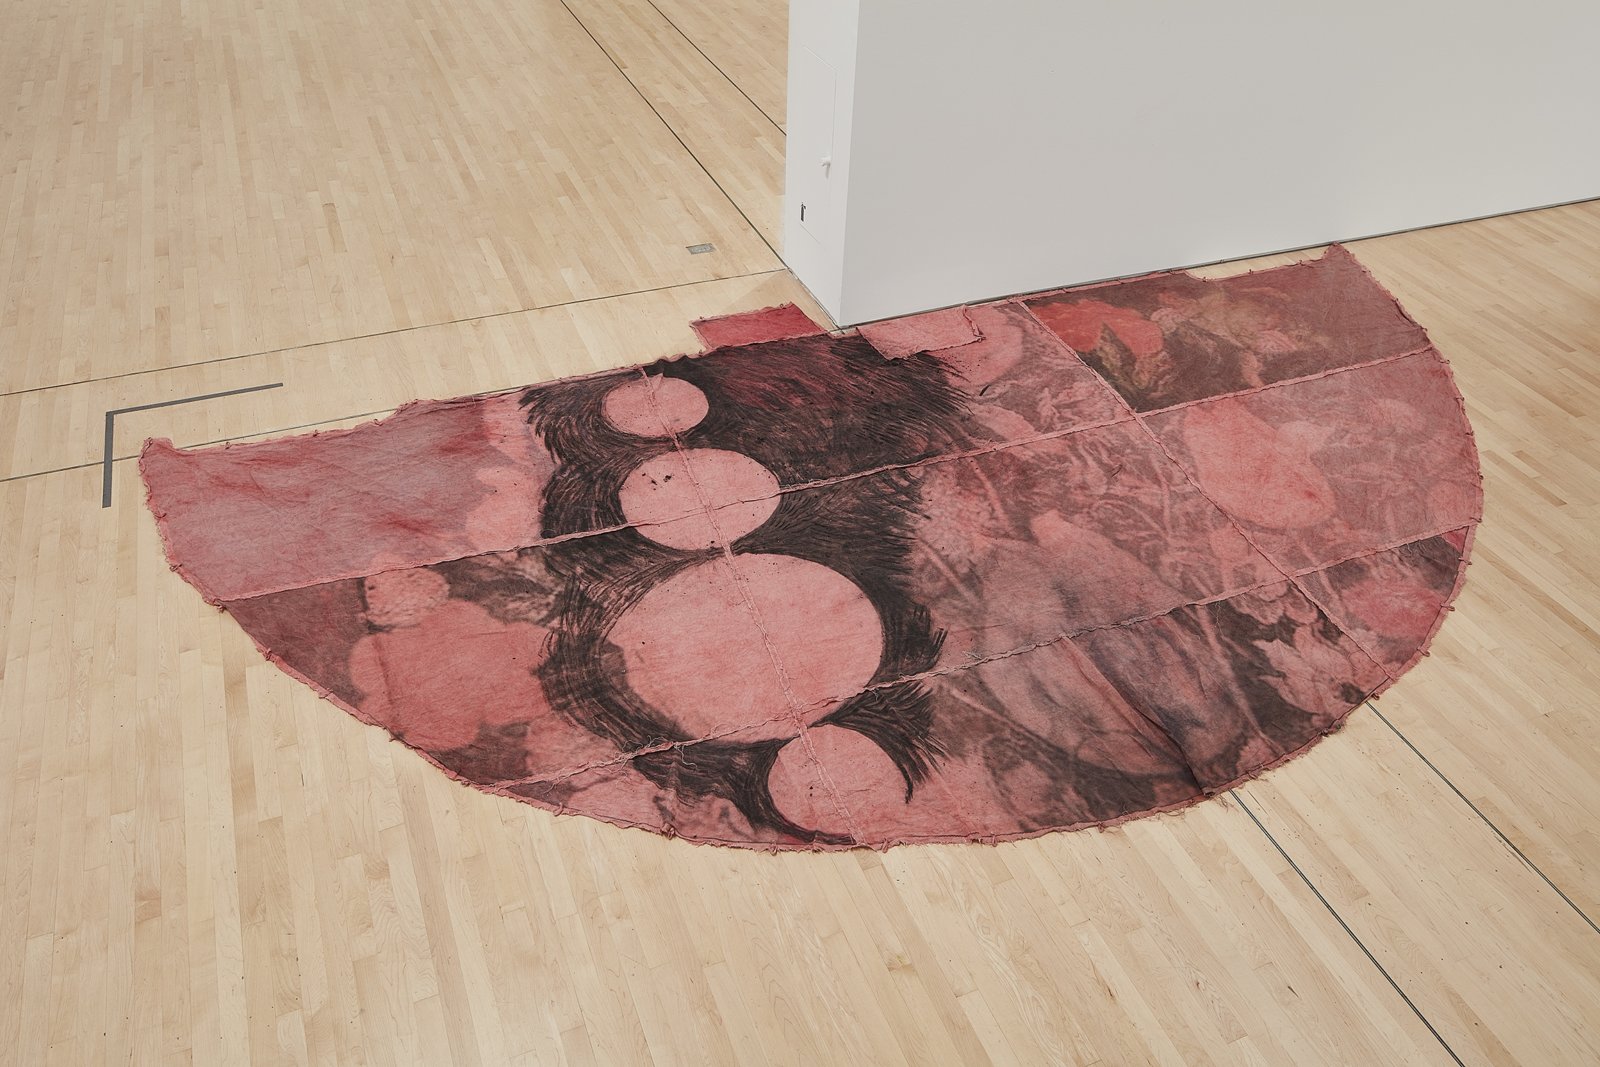 Duane Linklater, can the circle be unbroken 4, 2019, digital print on linen, cup and saucer red dye, indigo dye, charcoal, 120 x 240 in. (305 x 610 cm). Installation view, SOFT POWER, SF MOMA, San Francisco, USA, 2019